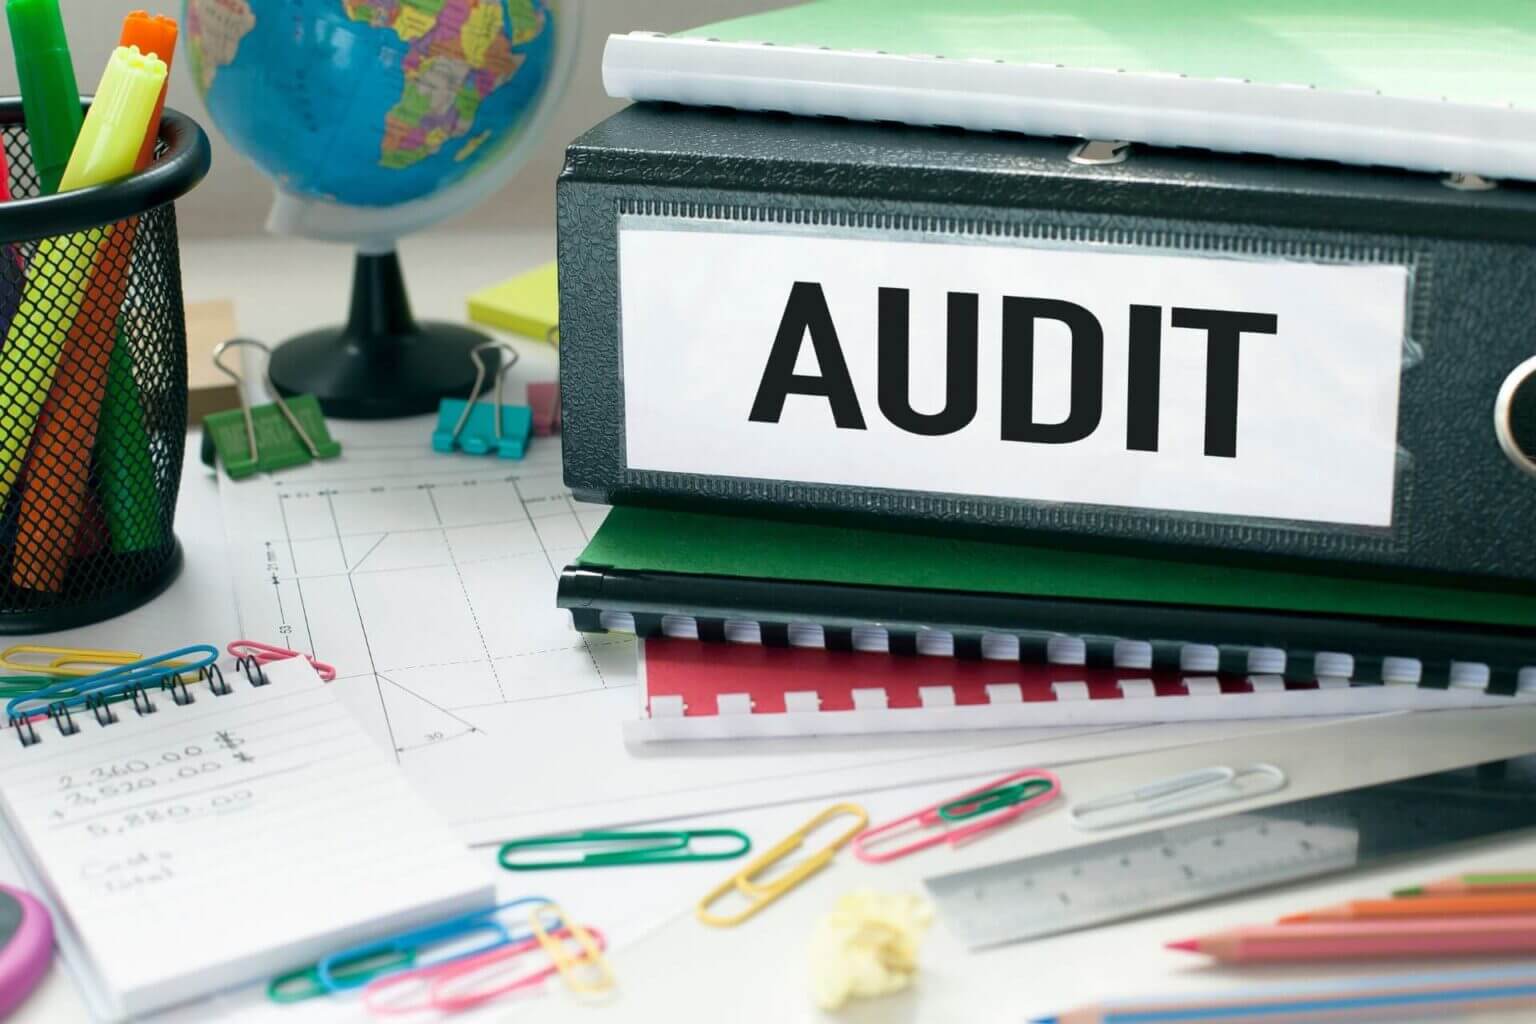 How to Find Best Auditing Services in Dubai?